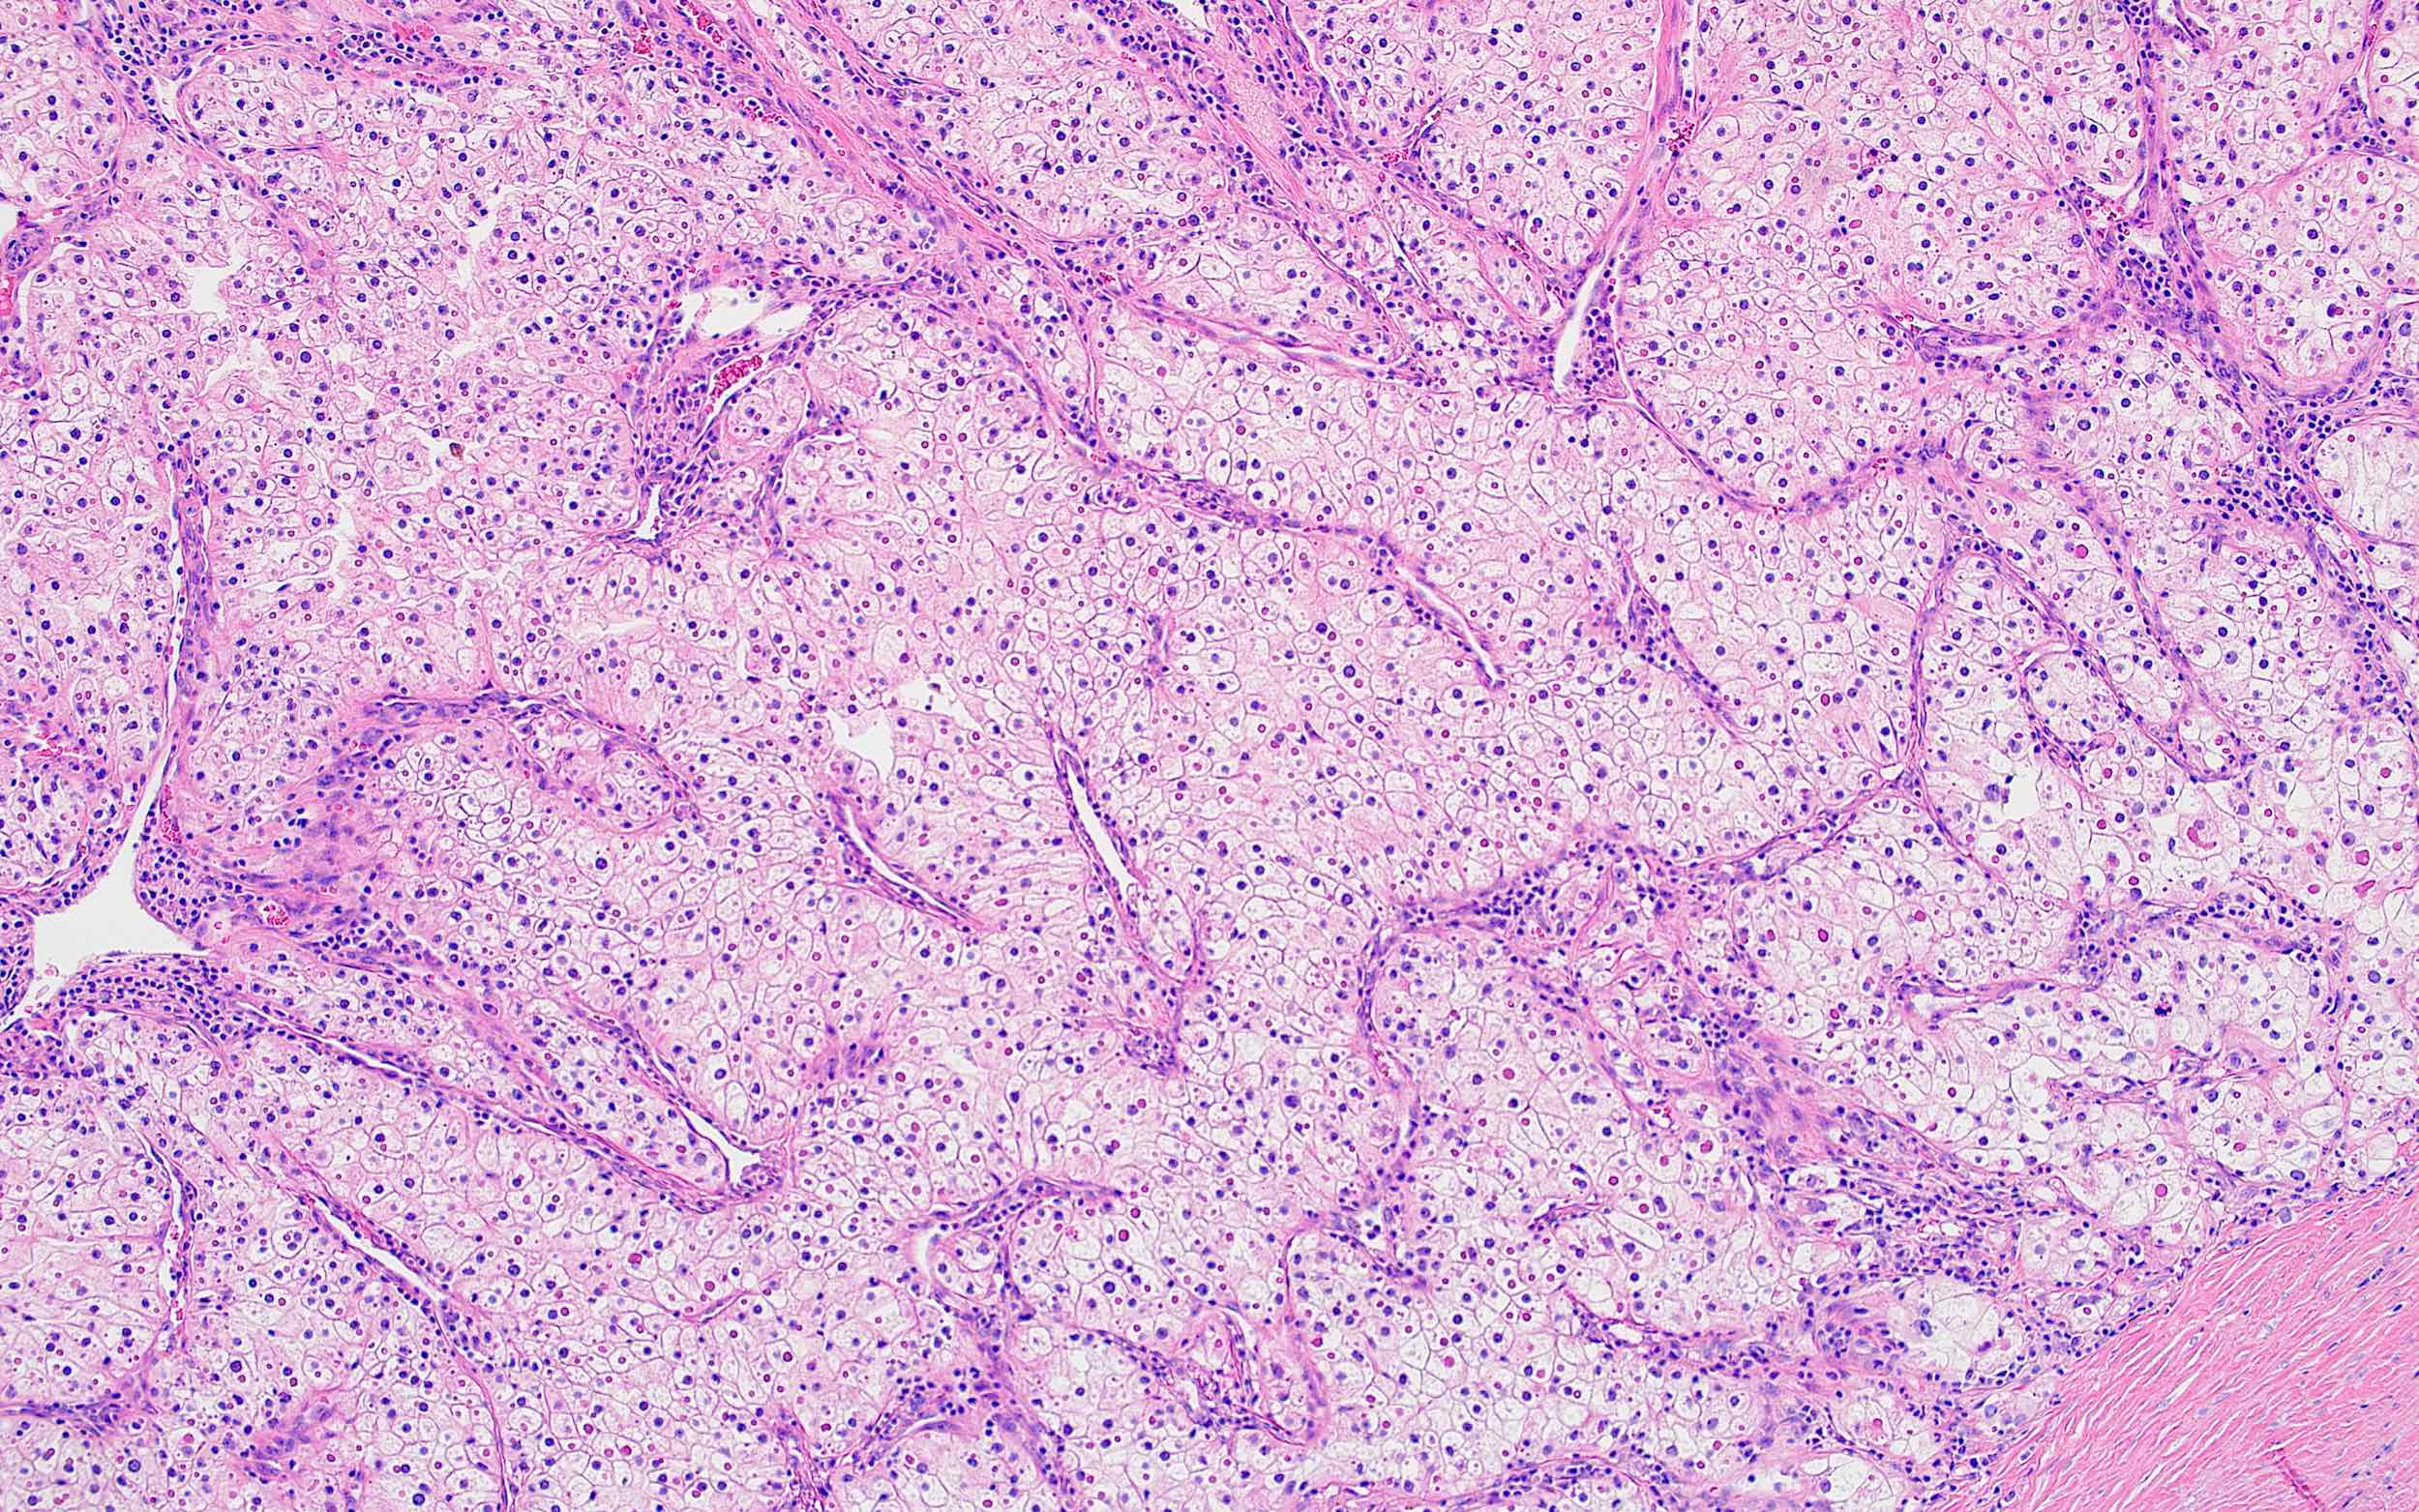 Minimally atypical cells of CCRCC